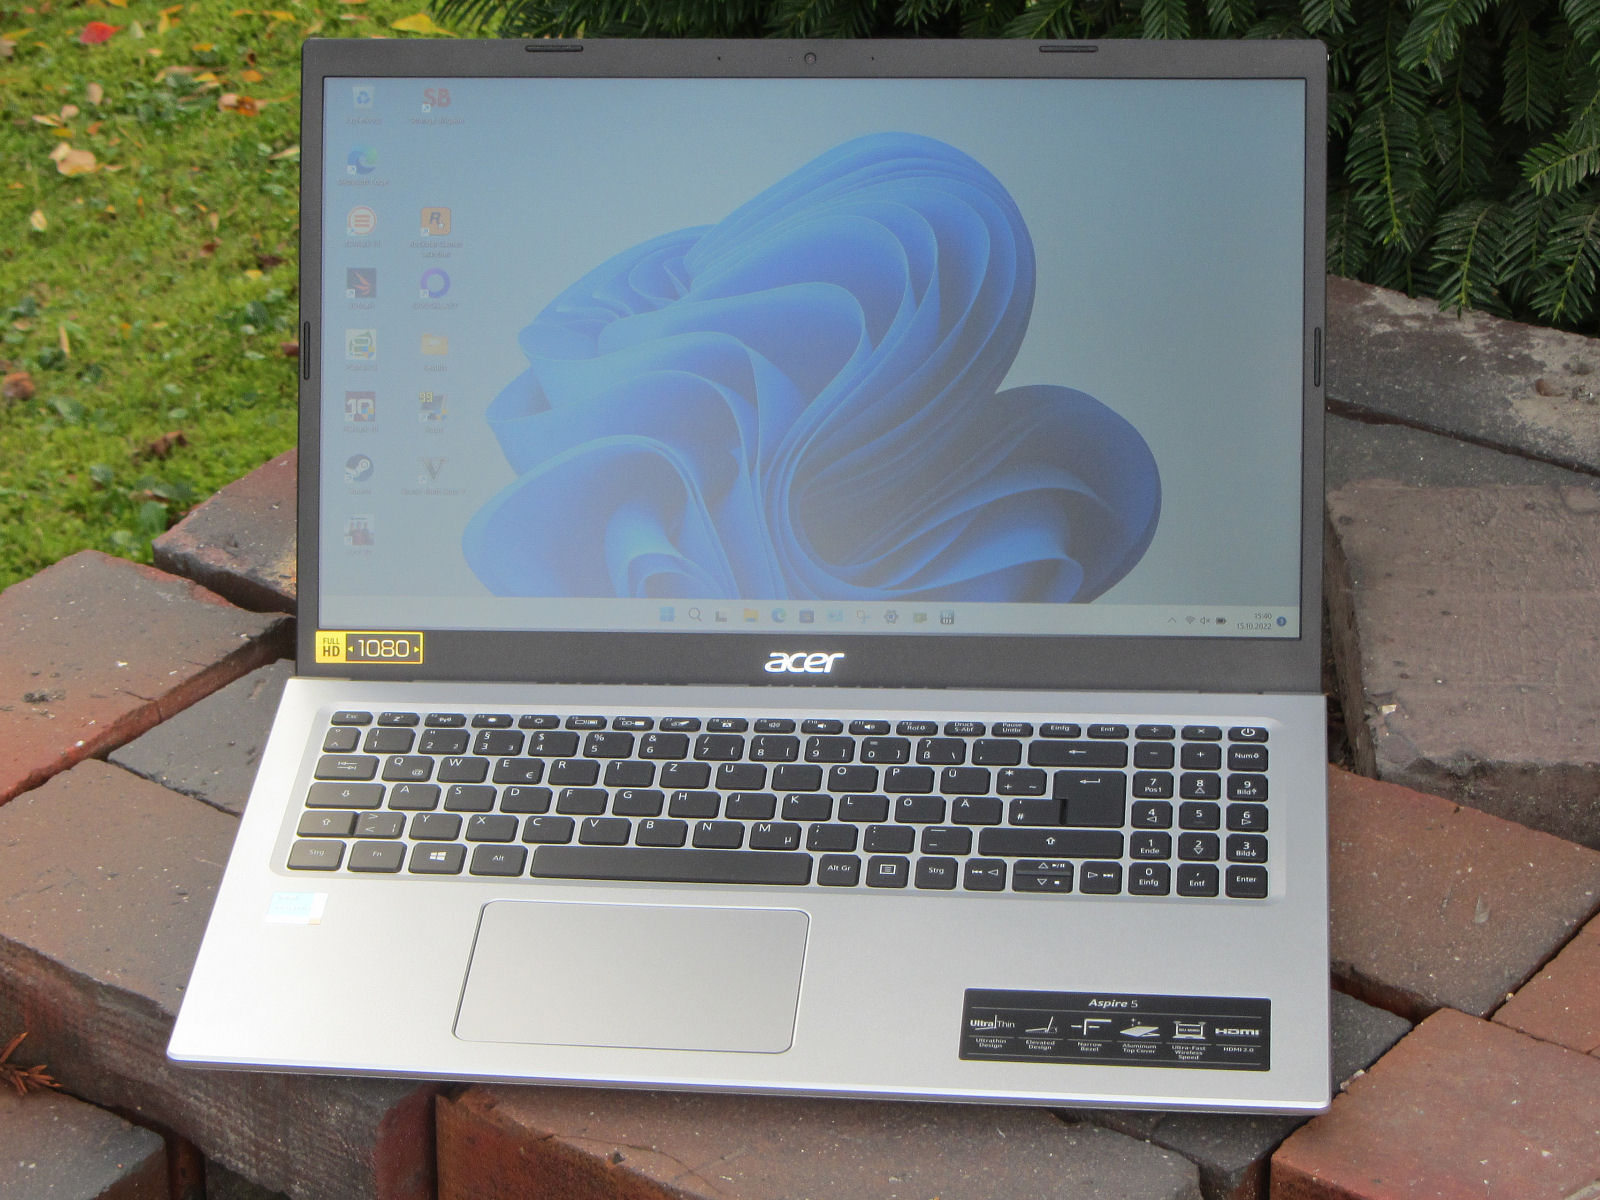 Acer Aspire 5 A515-56 review: Good value office laptop with